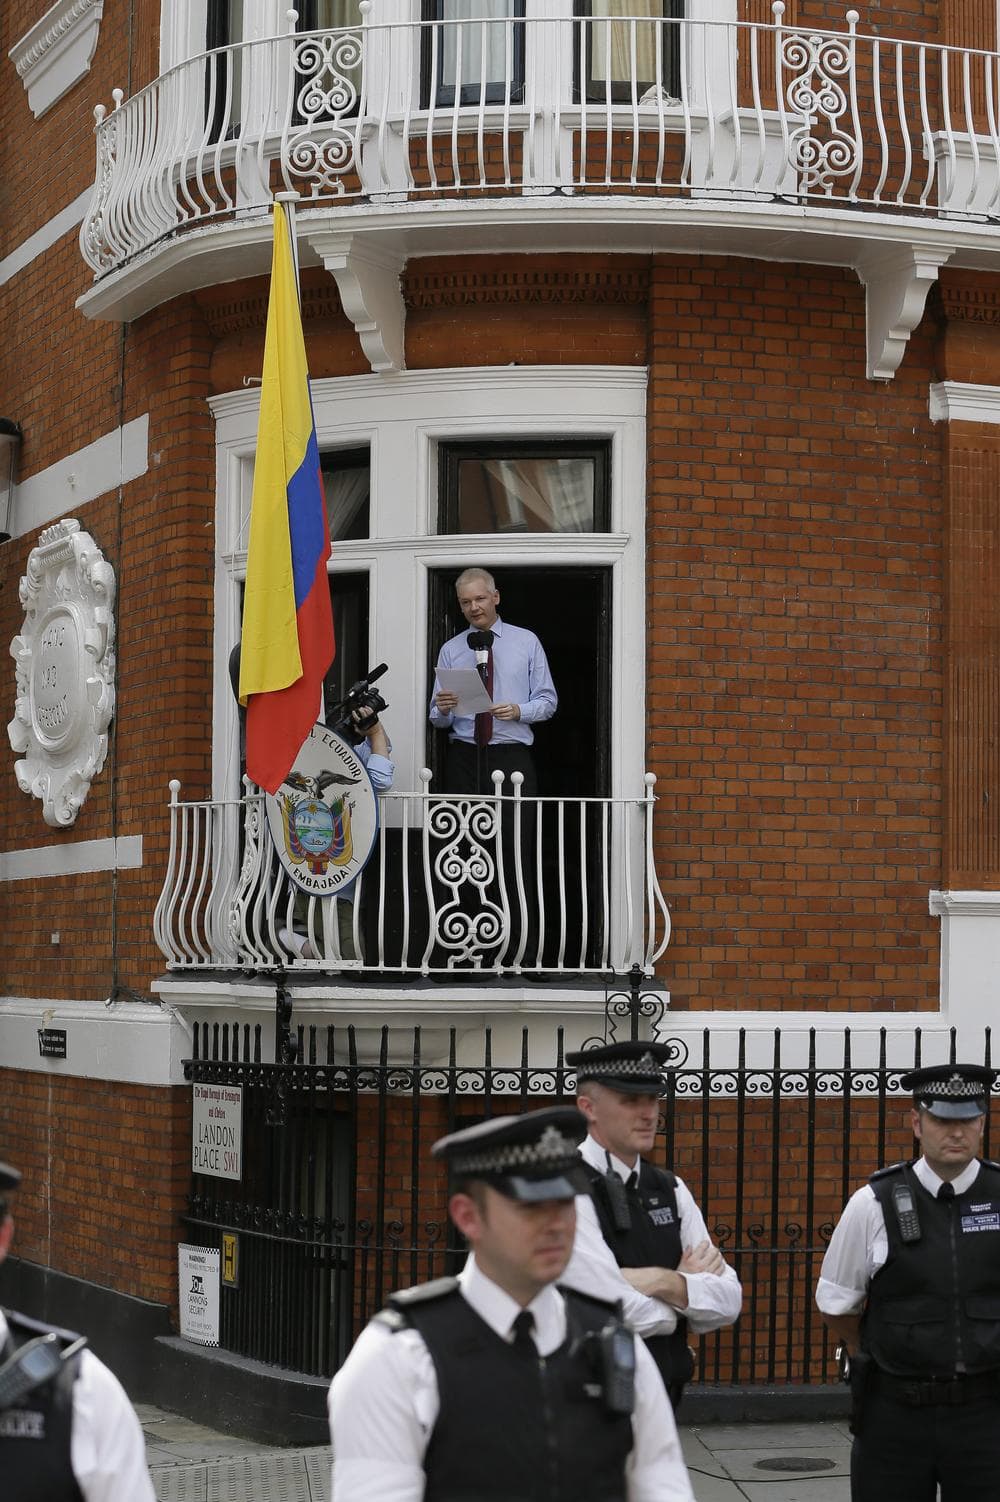 Julian Assange, founder of WikiLeaks, makes a statement from a balcony of the Equador Embassy in London. (AP)